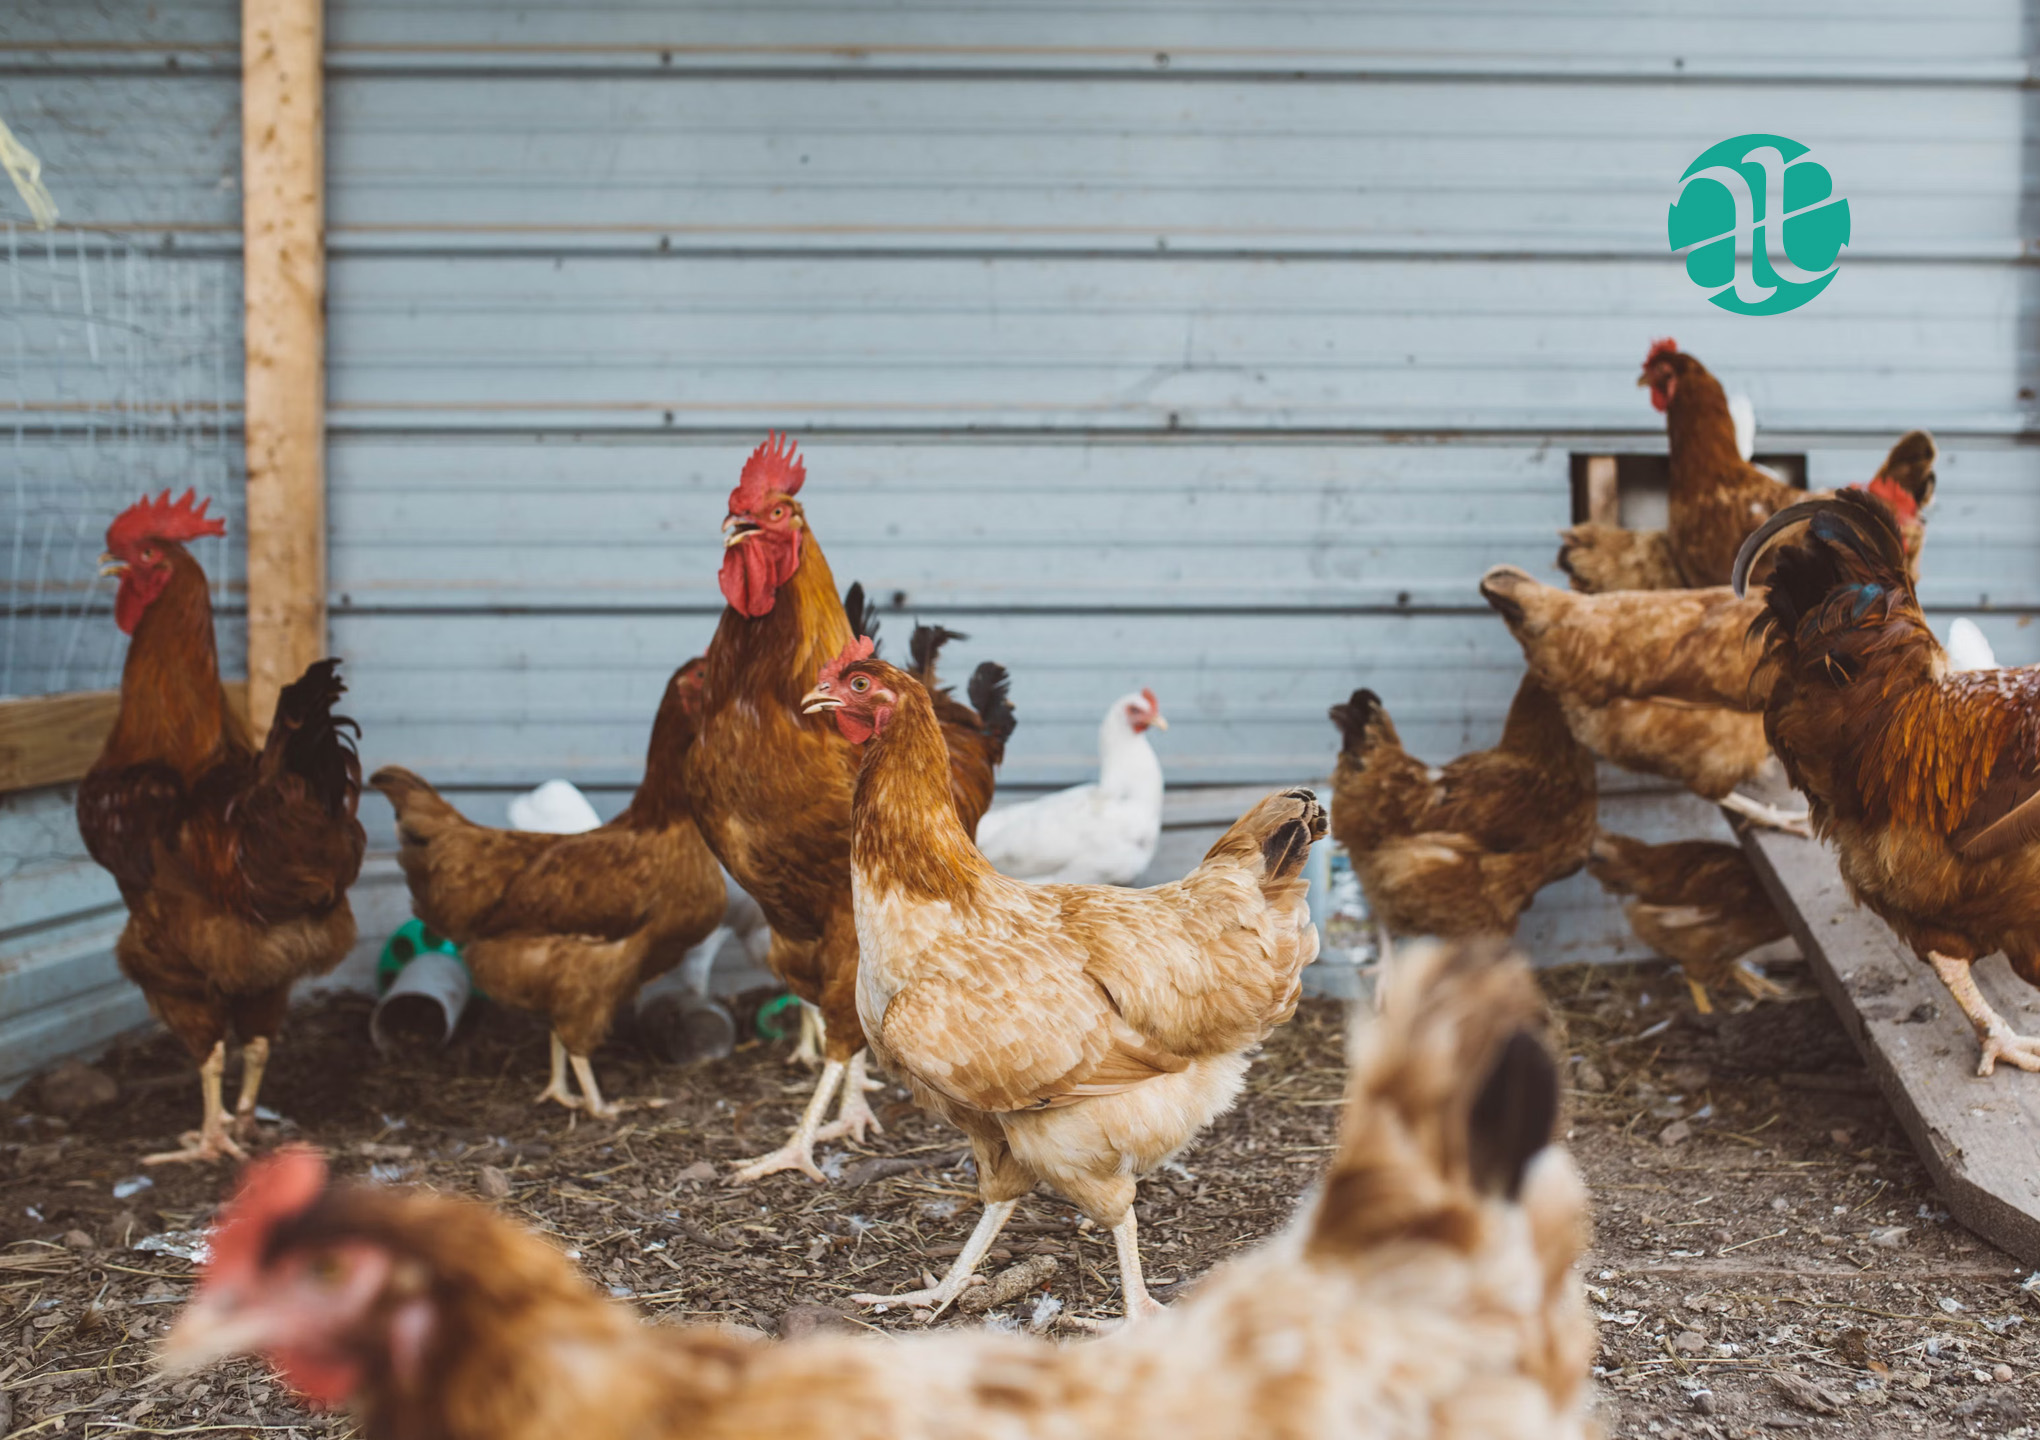 Raising Chickens? – Make sure you’re covered!